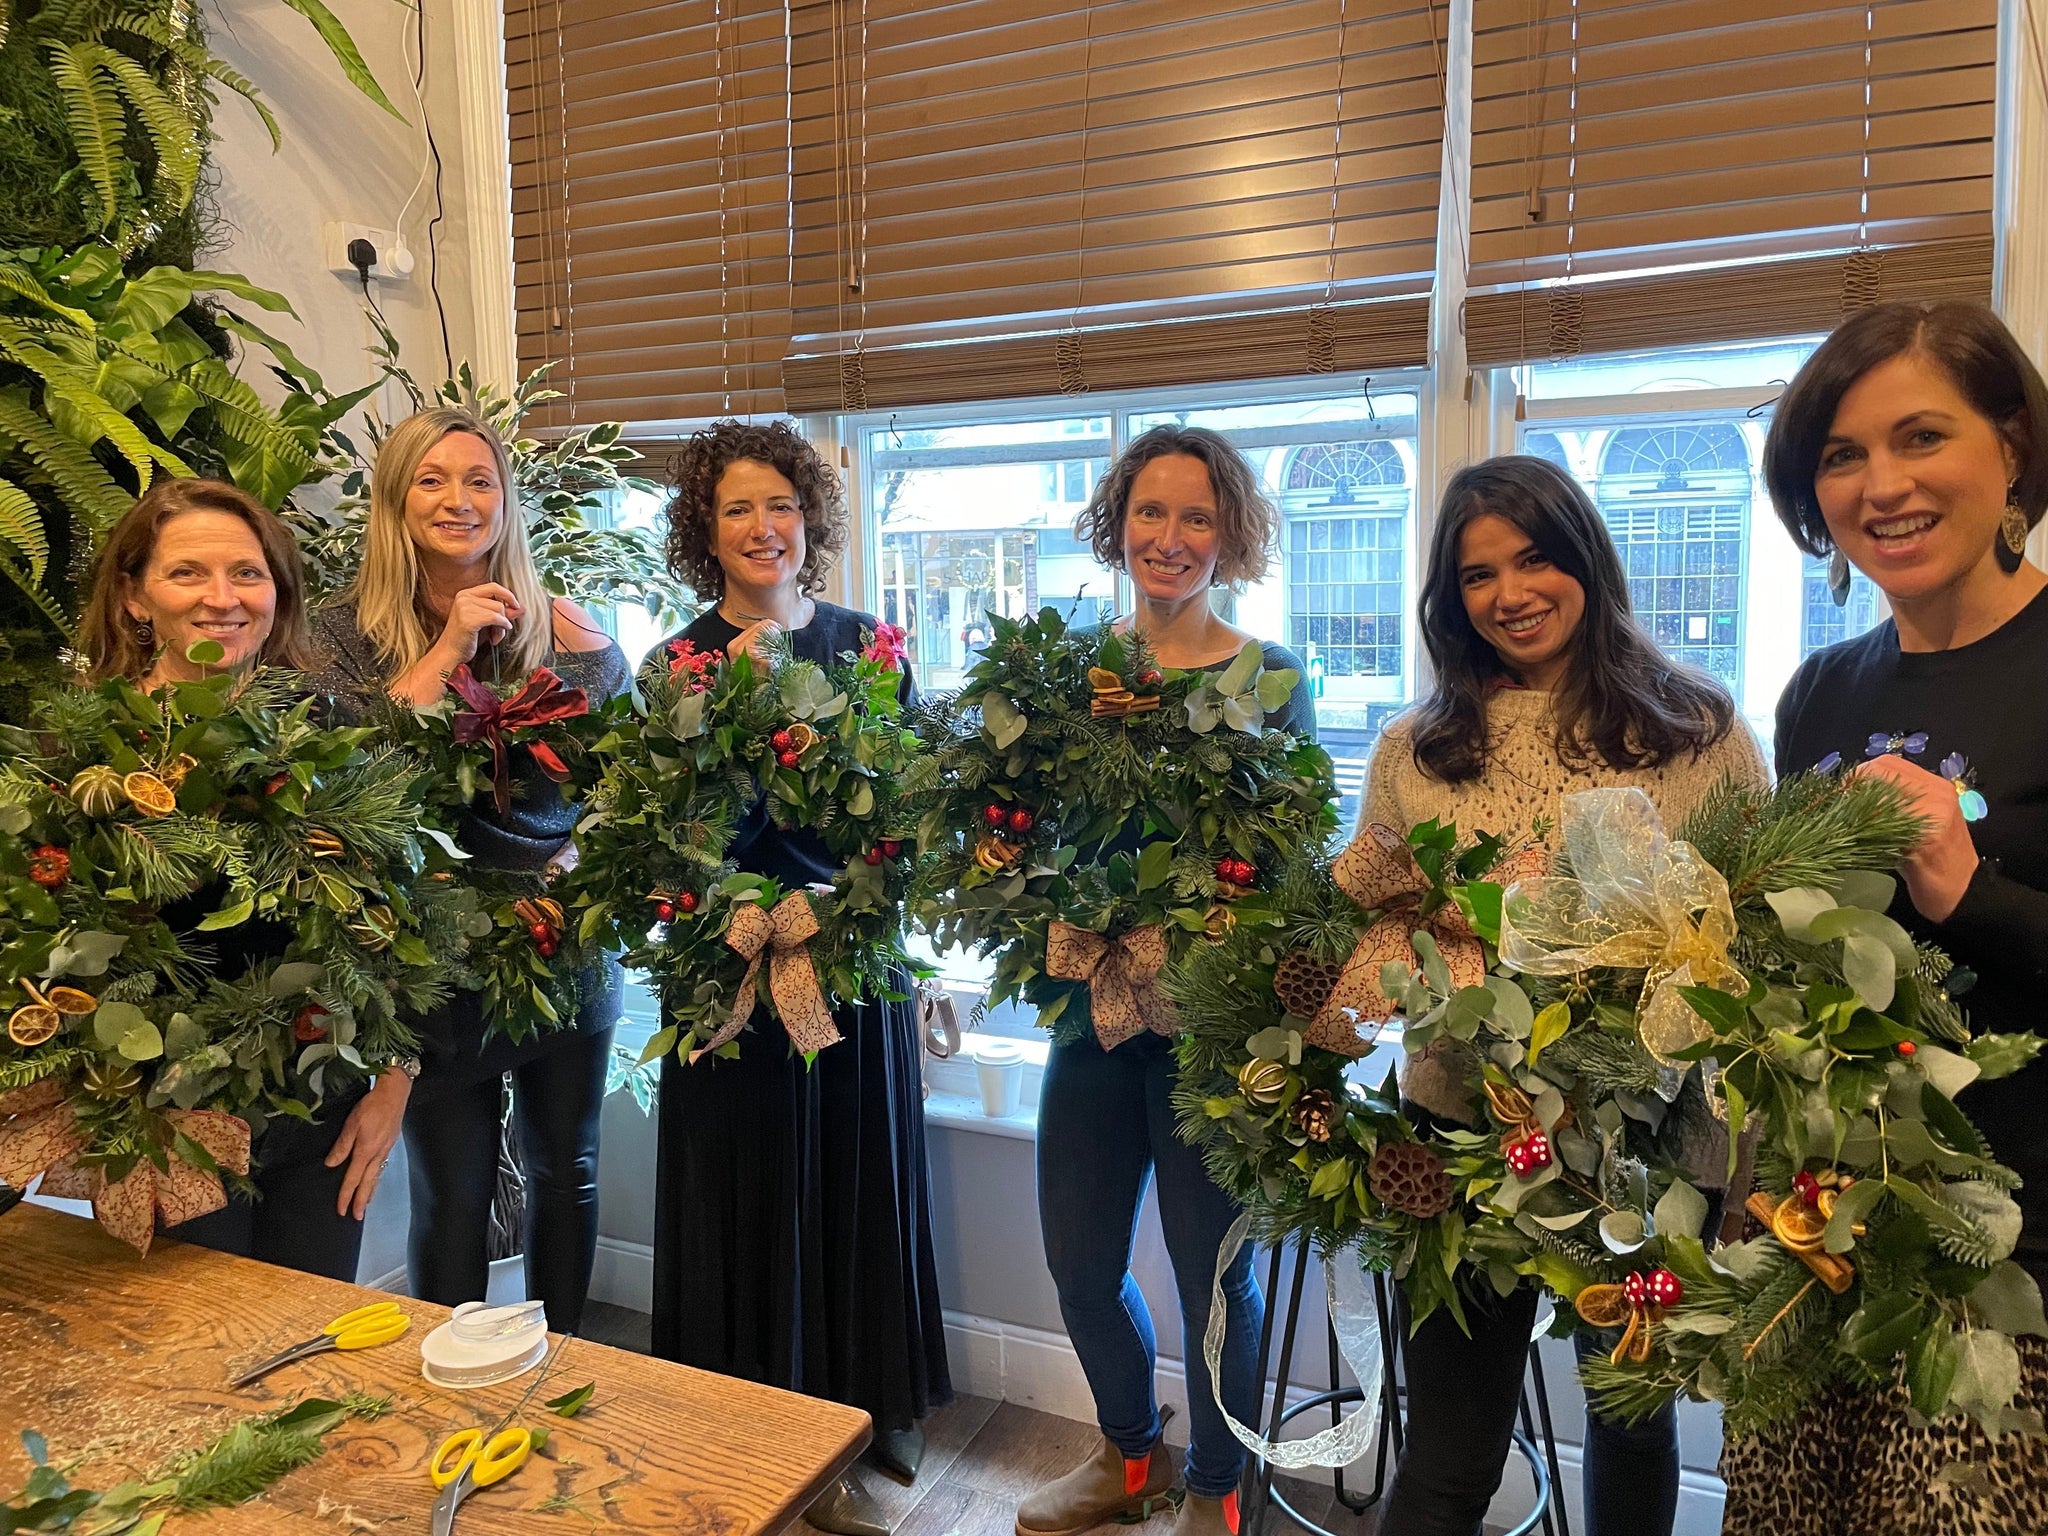 Christmas Wreath Workshop – Thursday 14th December, Starting @ 11am (£75 per person) 2.5 hours